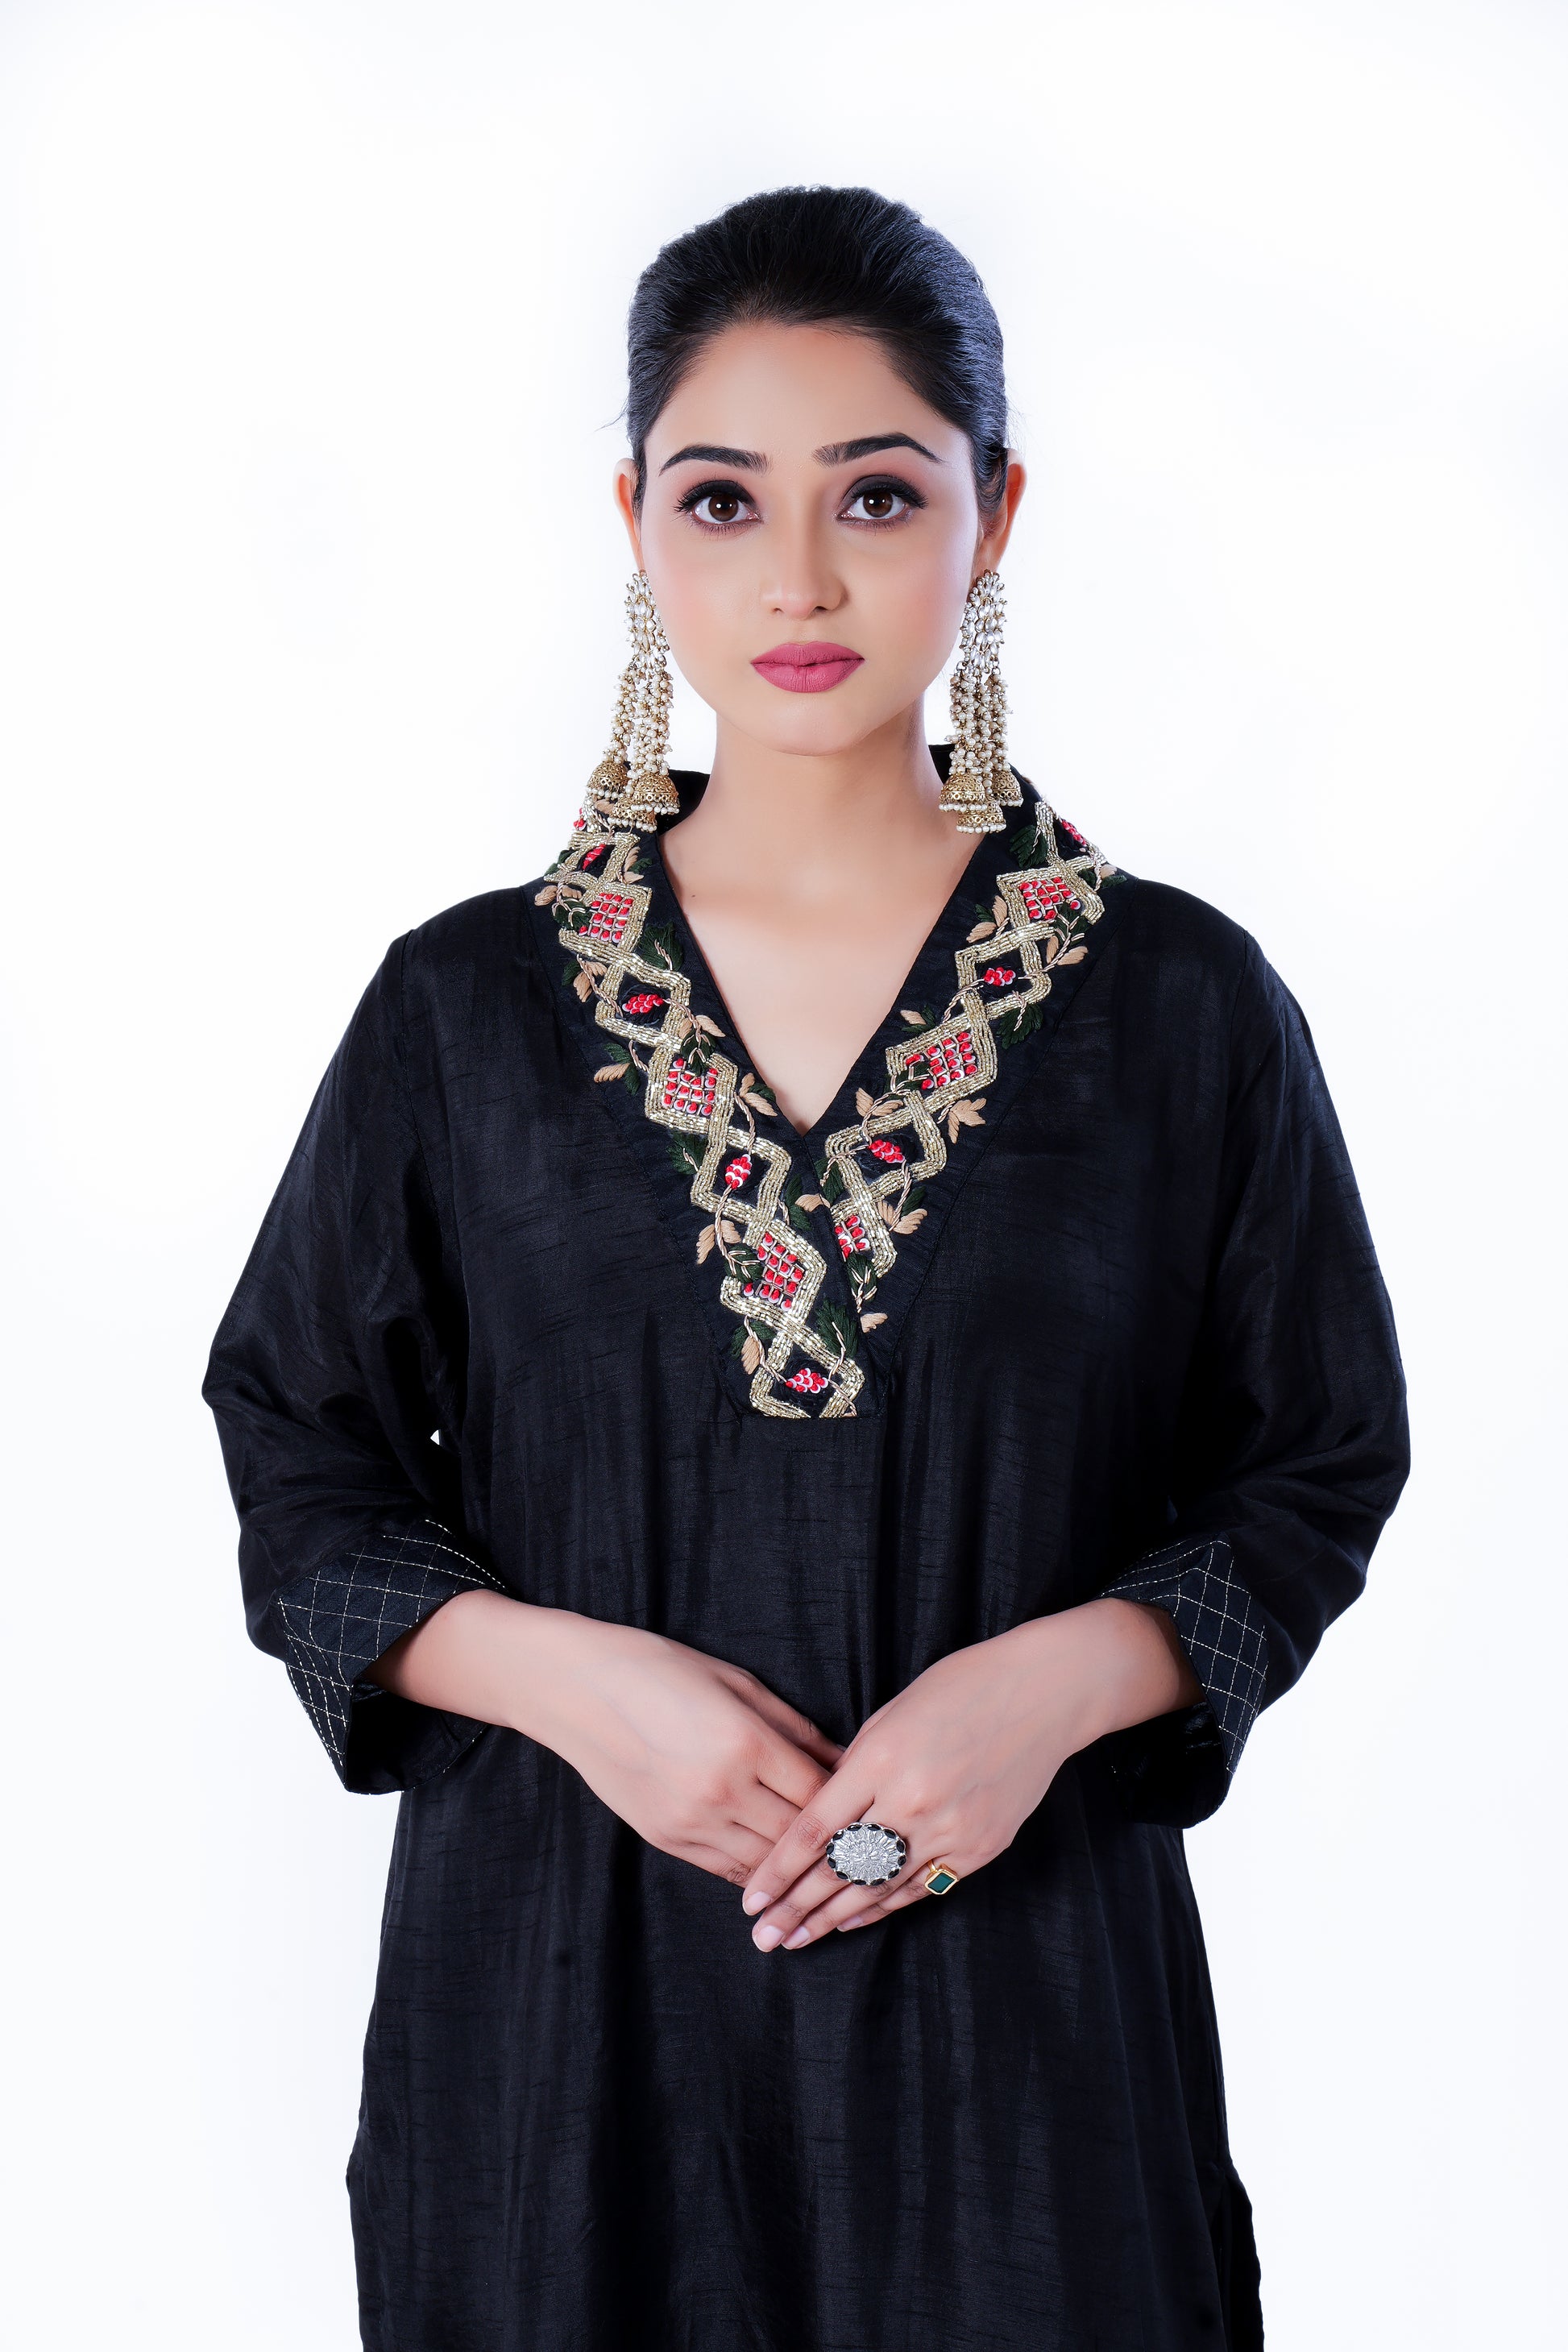 Straight Kurta Set with Organza Dupatta is made from luxurious Dola Silk and Zardozi Embroidery in Black Colou